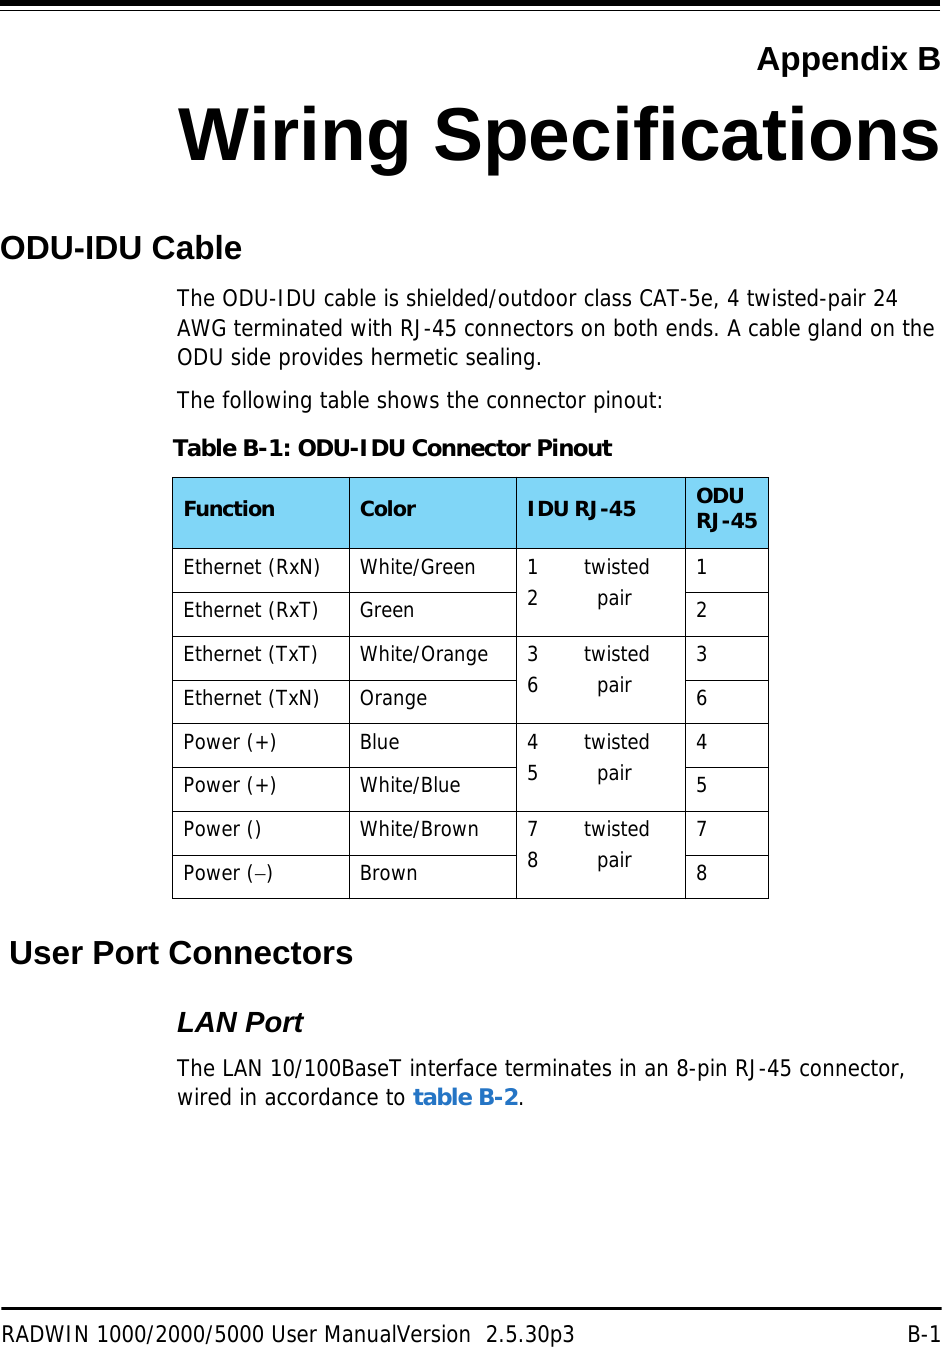 RADWIN 1000/2000/5000 User ManualVersion  2.5.30p3 B-1Appendix BWiring SpecificationsODU-IDU CableThe ODU-IDU cable is shielded/outdoor class CAT-5e, 4 twisted-pair 24 AWG terminated with RJ-45 connectors on both ends. A cable gland on the ODU side provides hermetic sealing.The following table shows the connector pinout: User Port ConnectorsLAN PortThe LAN 10/100BaseT interface terminates in an 8-pin RJ-45 connector, wired in accordance to table B-2.Table B-1: ODU-IDU Connector PinoutFunction Color IDU RJ-45 ODU RJ-45Ethernet (RxN) White/Green 1       twisted2         pair 1 Ethernet (RxT) Green 2 Ethernet (TxT) White/Orange 3       twisted6         pair 3 Ethernet (TxN) Orange 6 Power (+) Blue 4       twisted5         pair 4 Power (+) White/Blue 5 Power () White/Brown 7       twisted8         pair 7 Power () Brown 8 